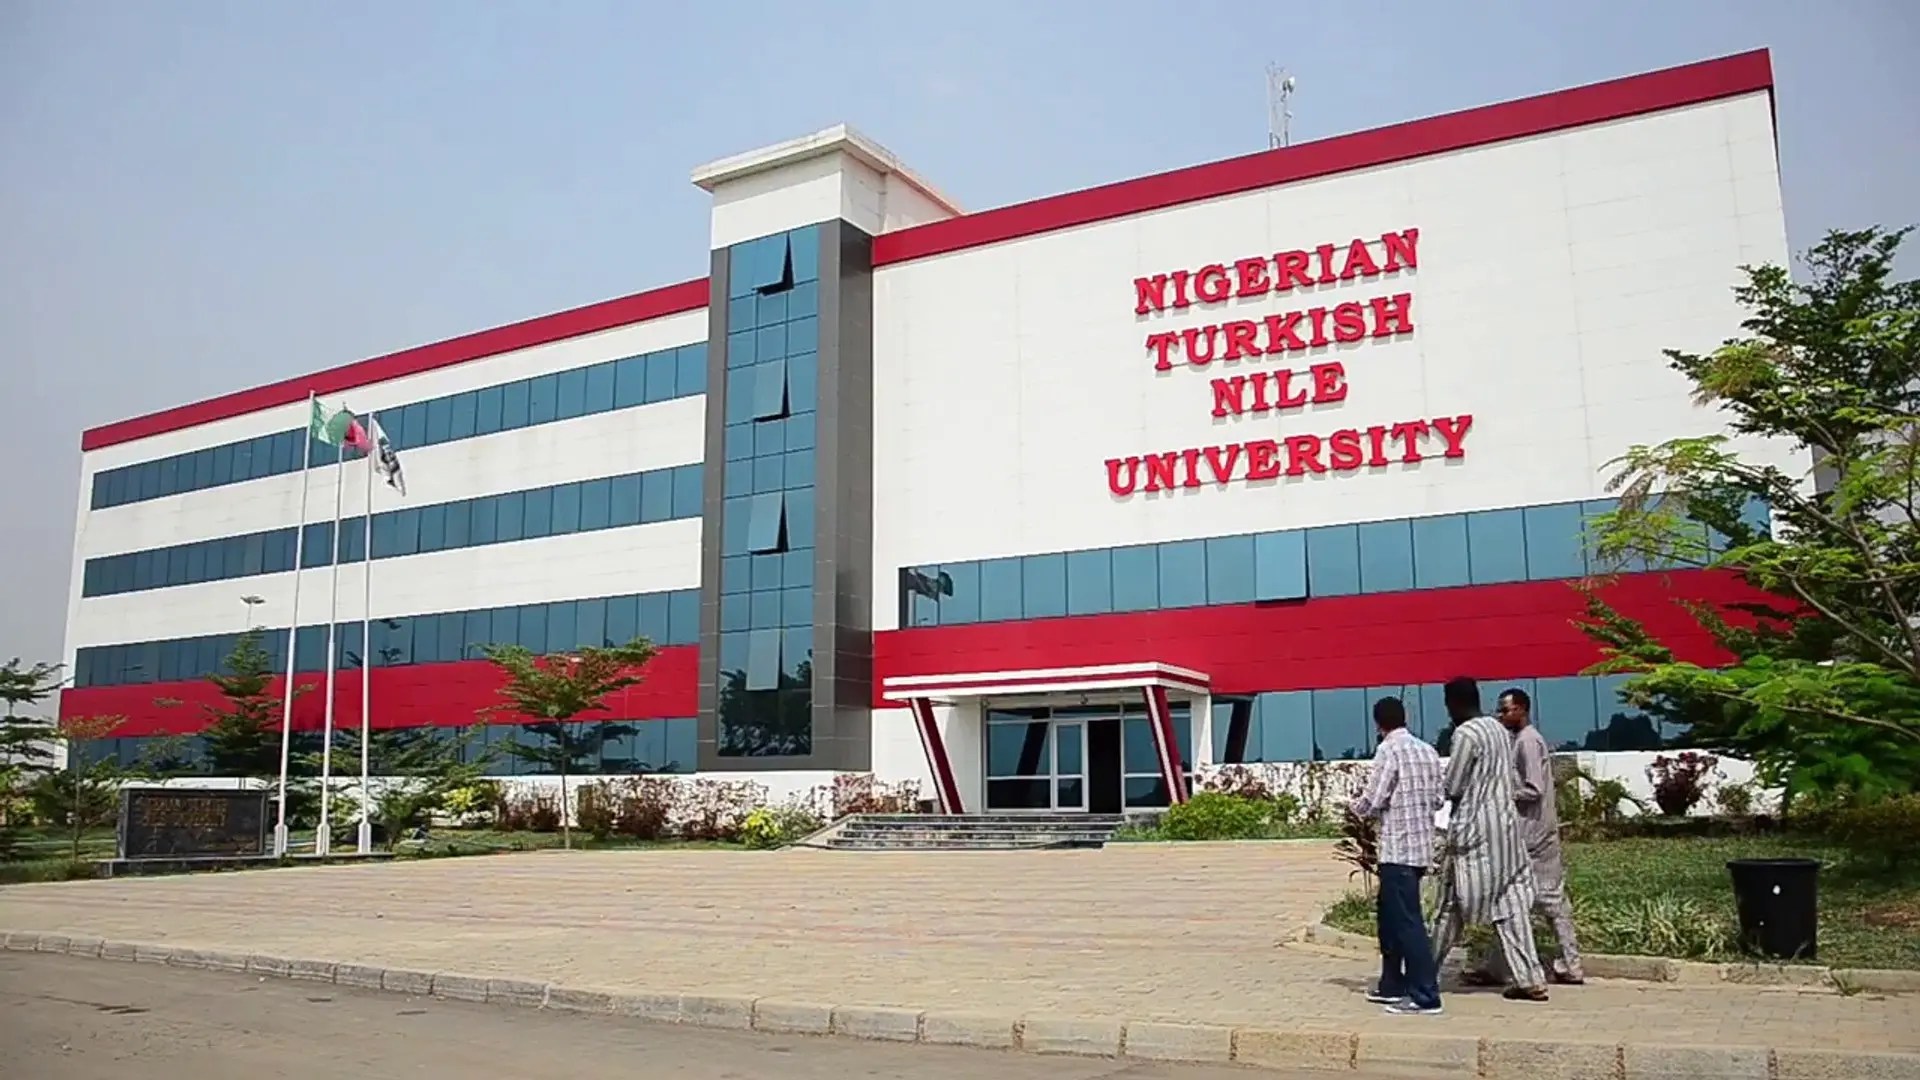 List Of Courses Offered In Nigerian Turkish Nile University Abuja